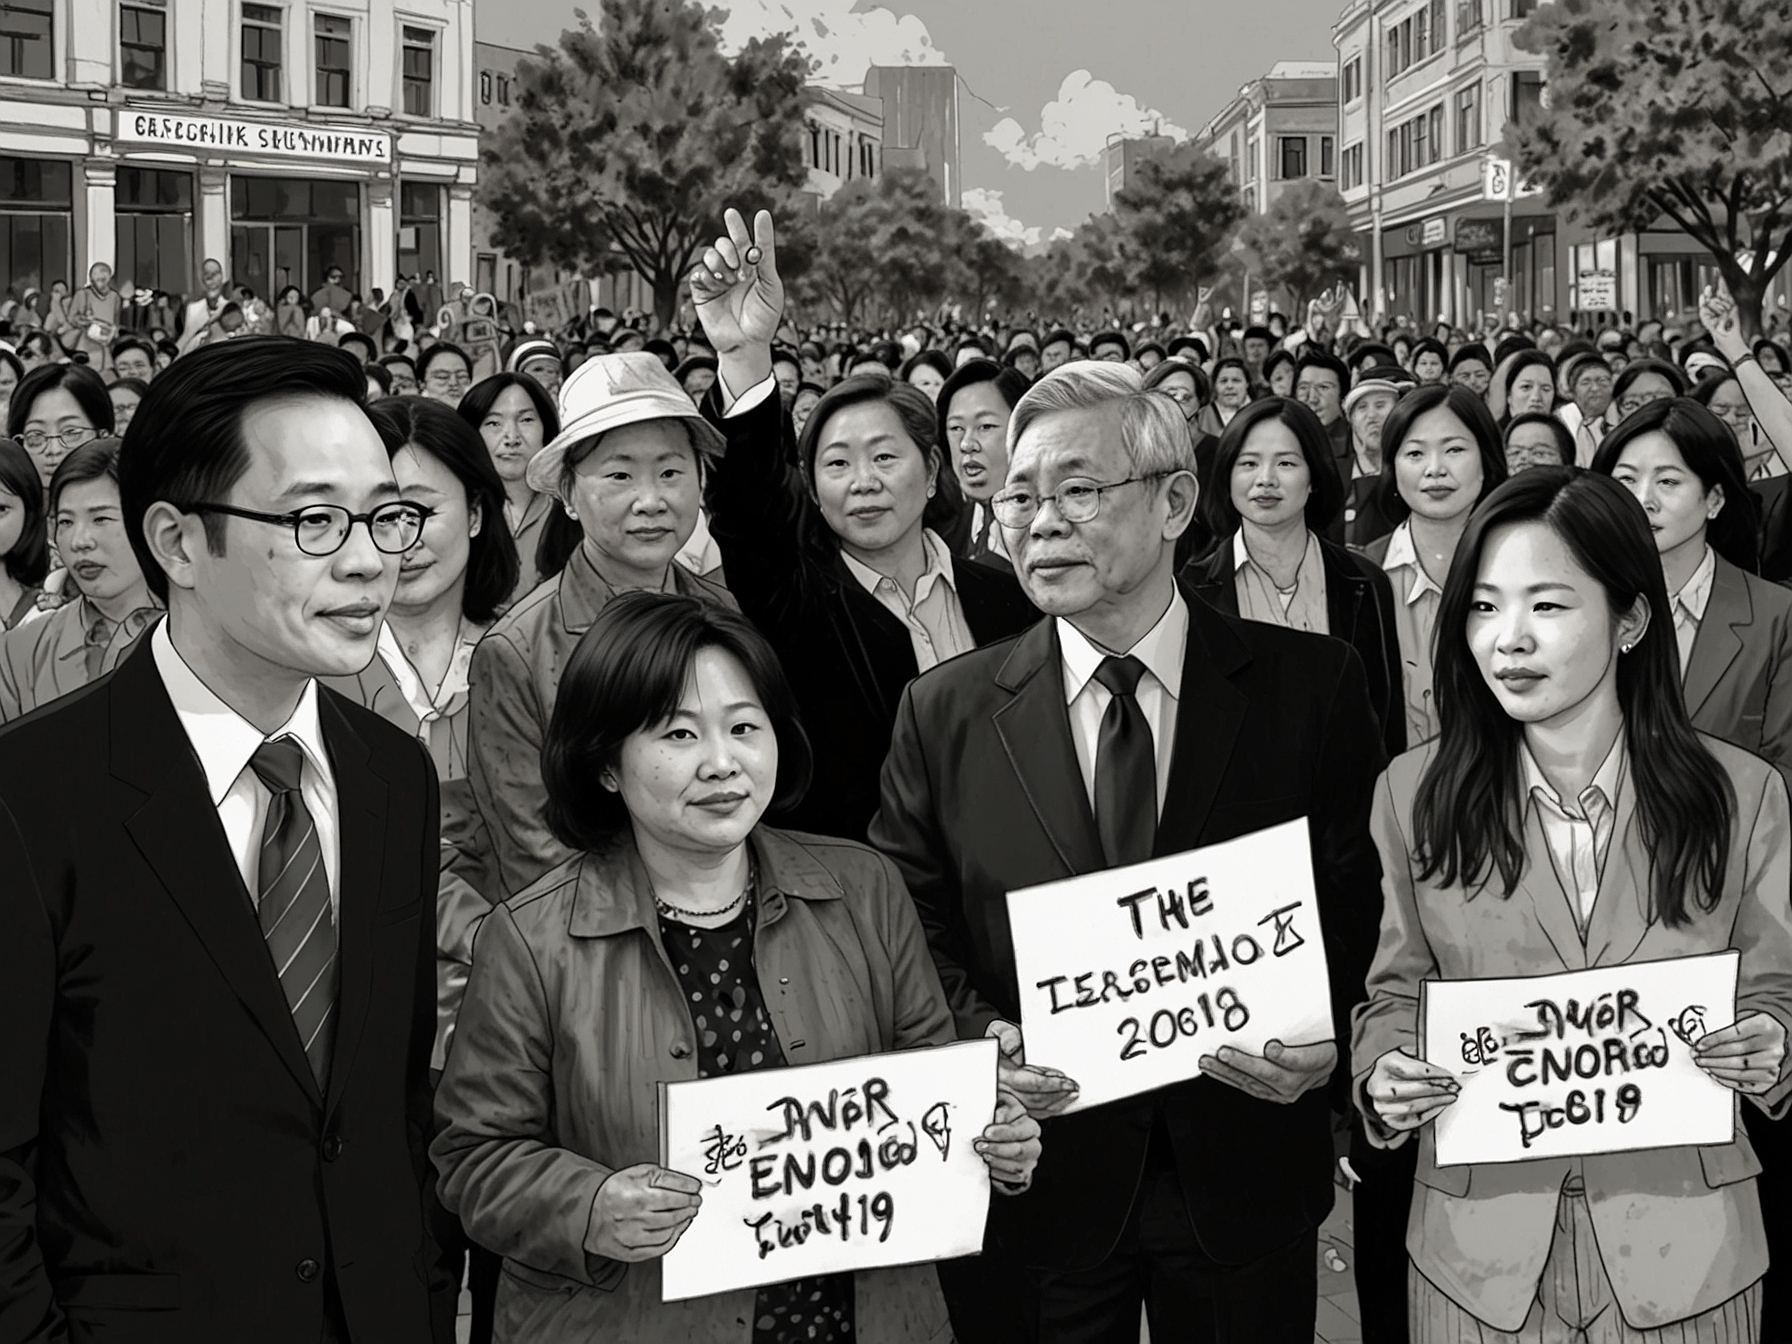 Community leaders and activists hold a rally in support of Mayor Sheng Thao, emphasizing her contributions to urban reform and advocating for transparency in the investigation.